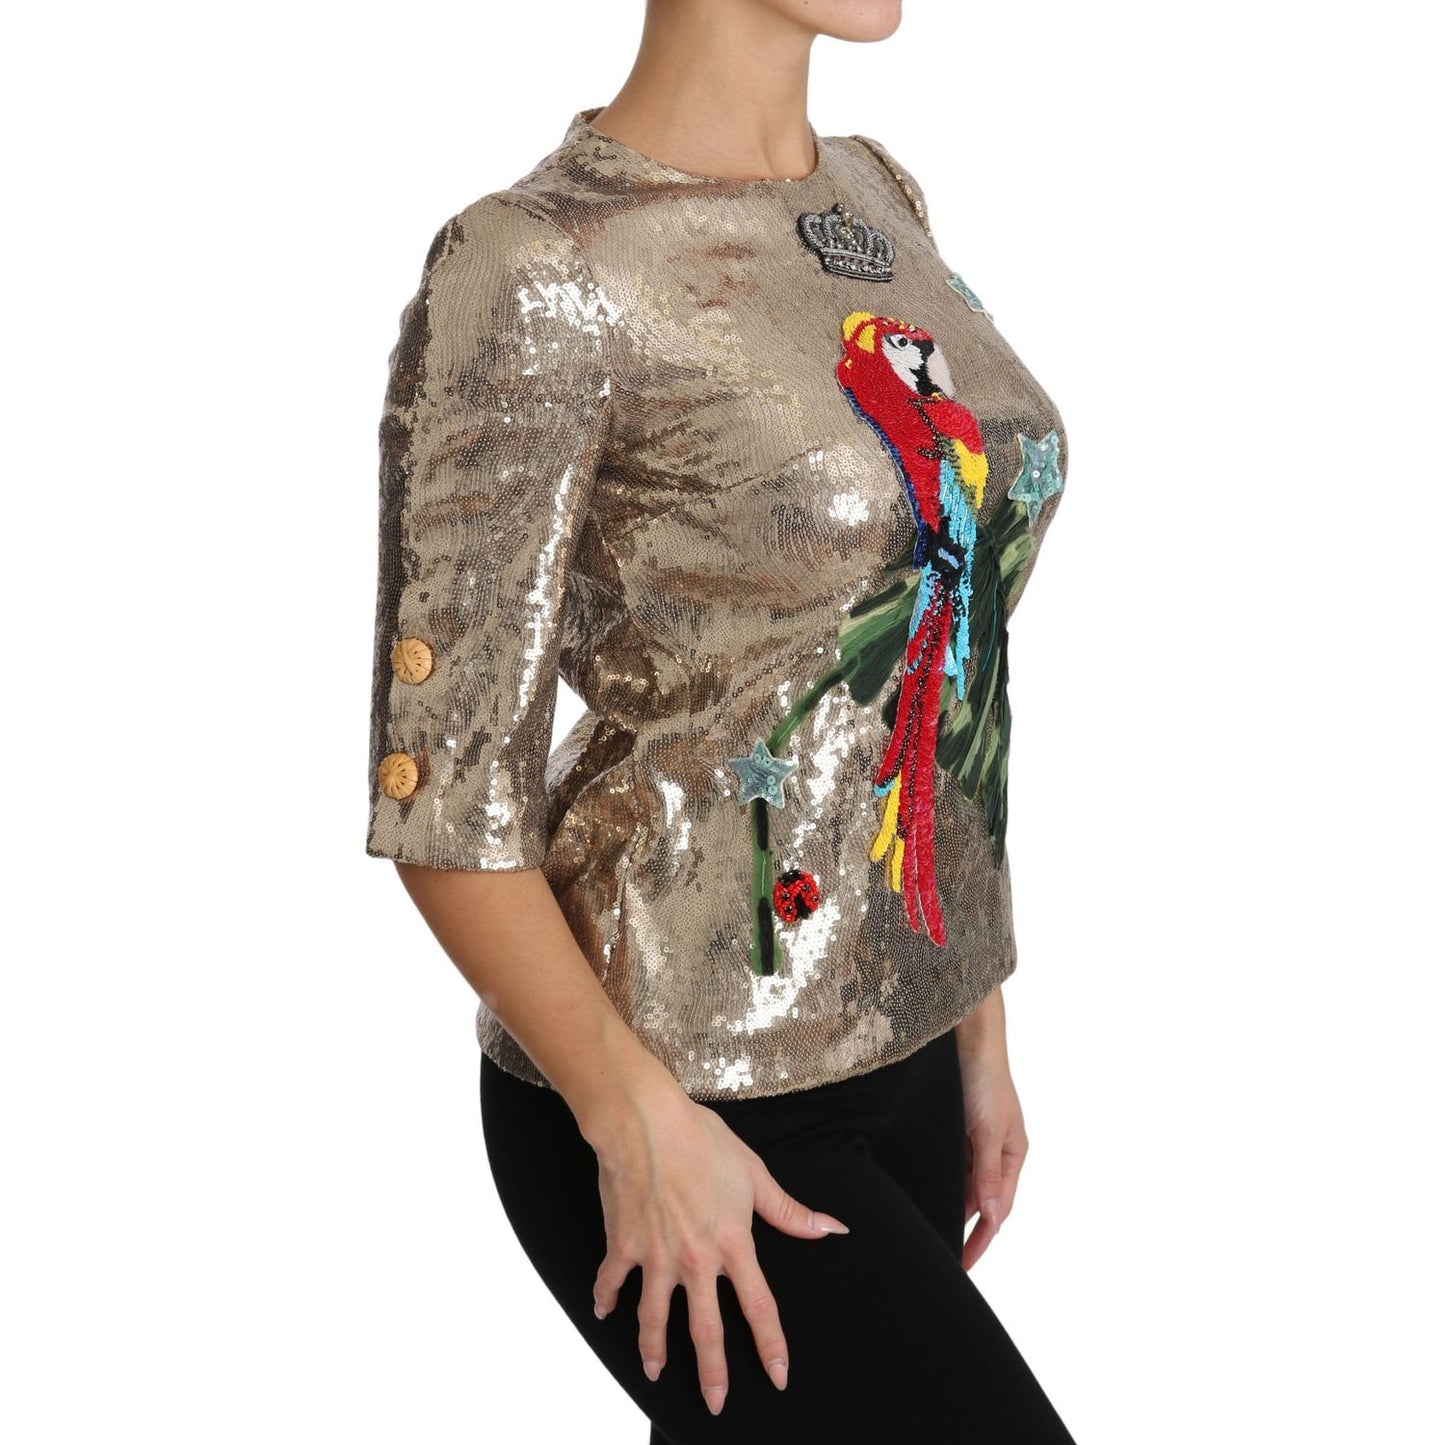 Dolce & Gabbana Gold Parrot Motif Crewneck Blouse with Crystals gold-sequined-parrot-crystal-blouse 654059-gold-sequined-parrot-crystal-blouse-4.jpg